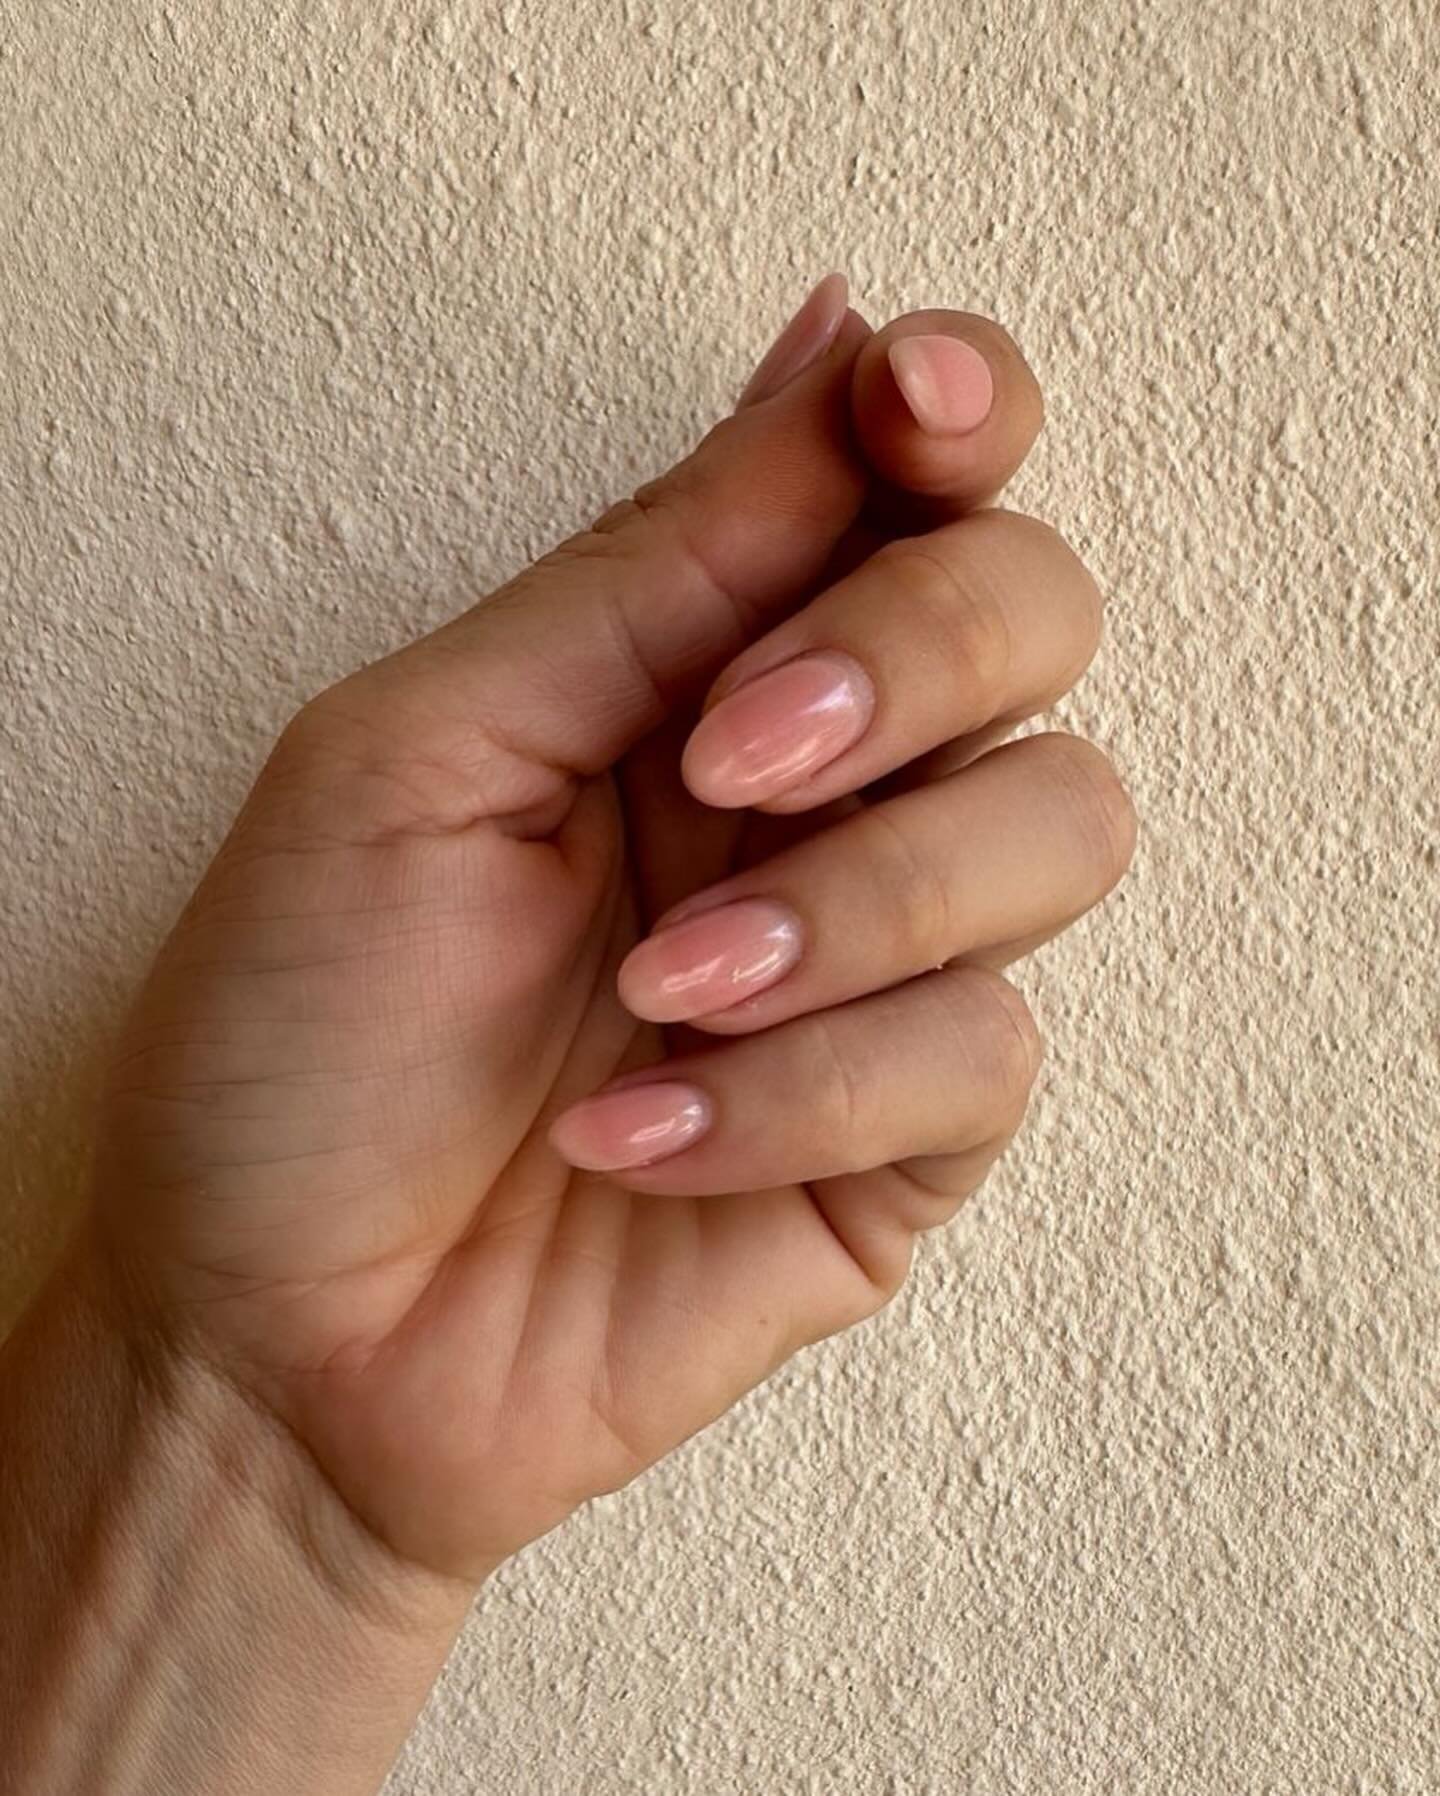 She wanted French&hellip;.but make it Subtle&hellip;. So we ordered the colours for her and made her dream Mani come to life! 🥰😍 @frederique_lessard 

#frenchmanicure #subtlenails #manicure #canggu #canggunails .#bali #balinails #nailart